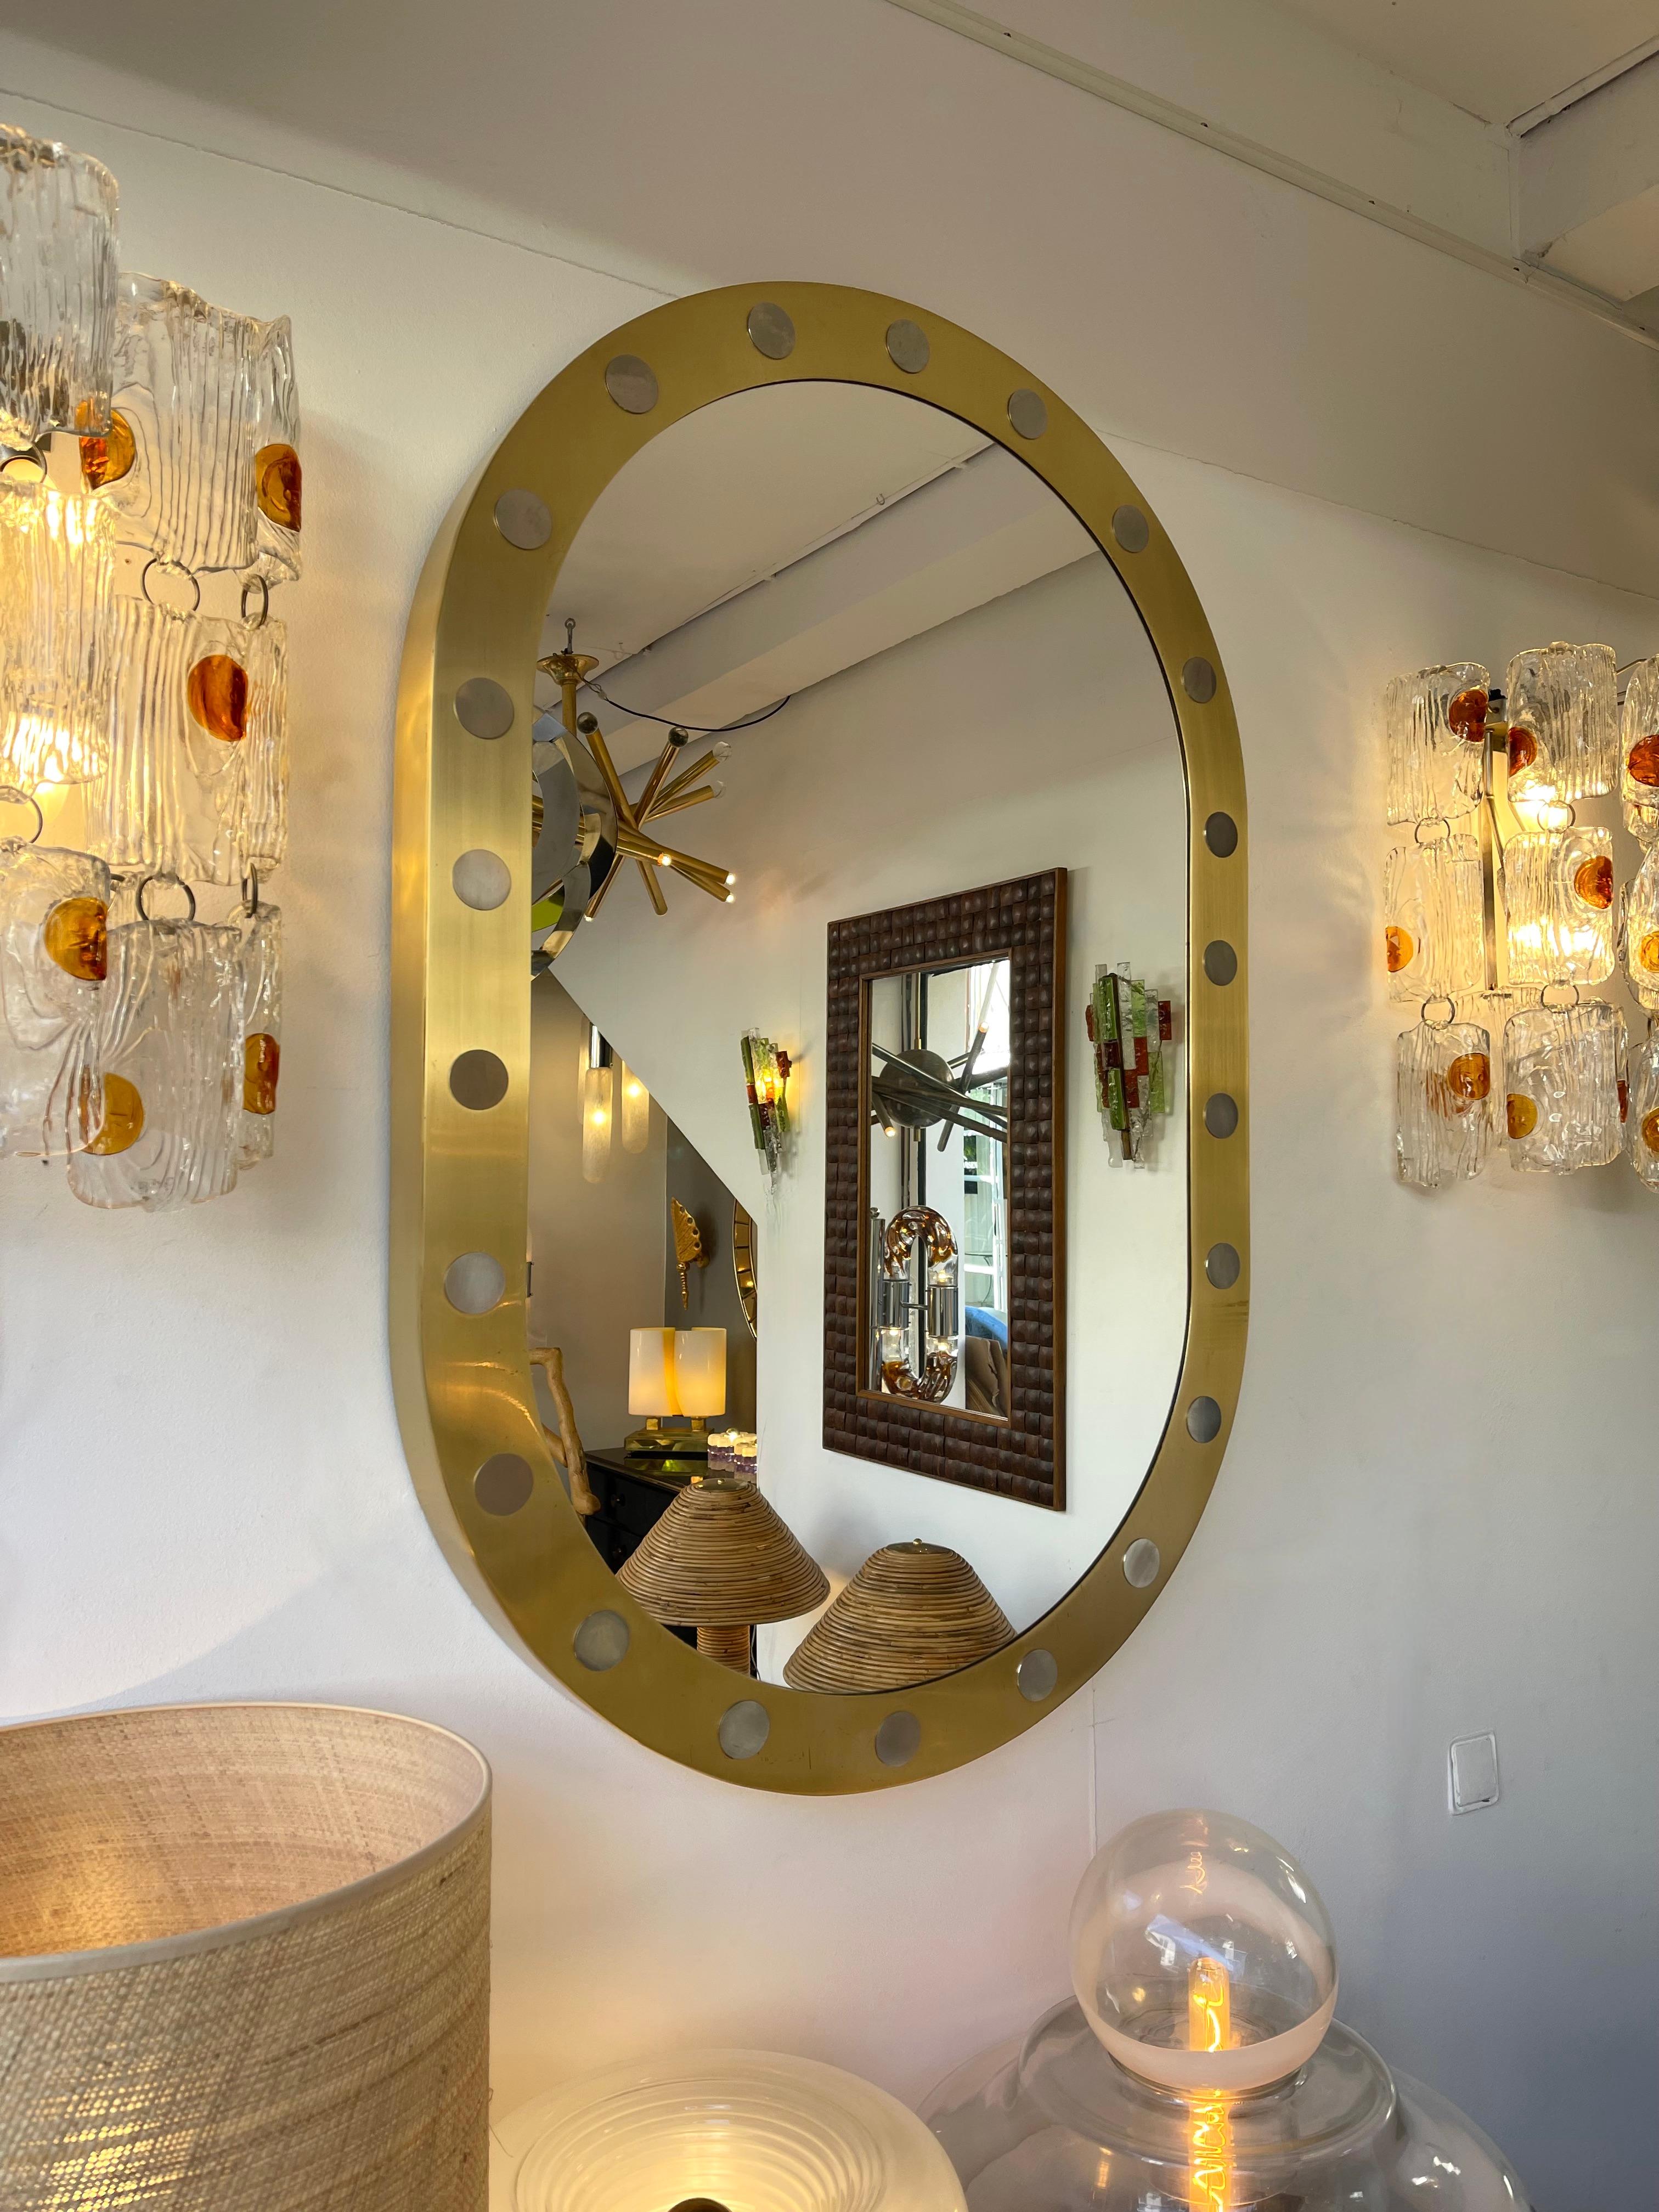 Massive thick side full brass wall mirror with silver metal decor In the mood of Mid-Century Modern Space Age style, Hollywood Regency.